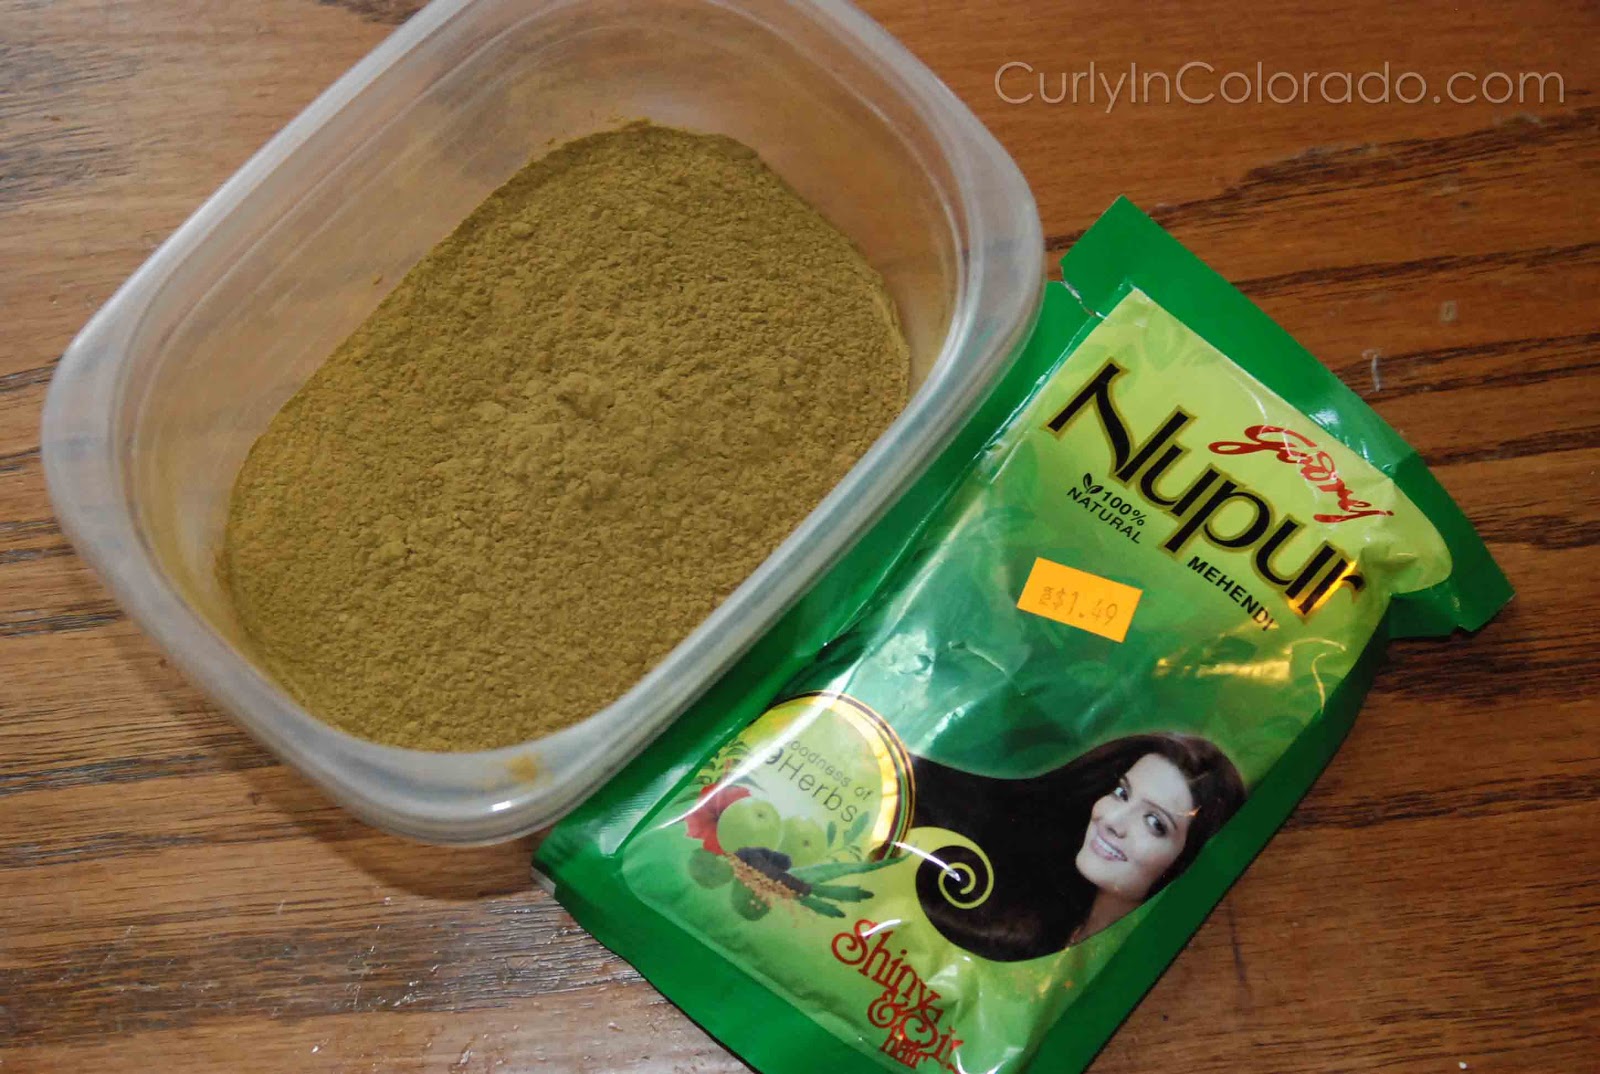 Godrej Nupur Henna Review - Curly in Colorado